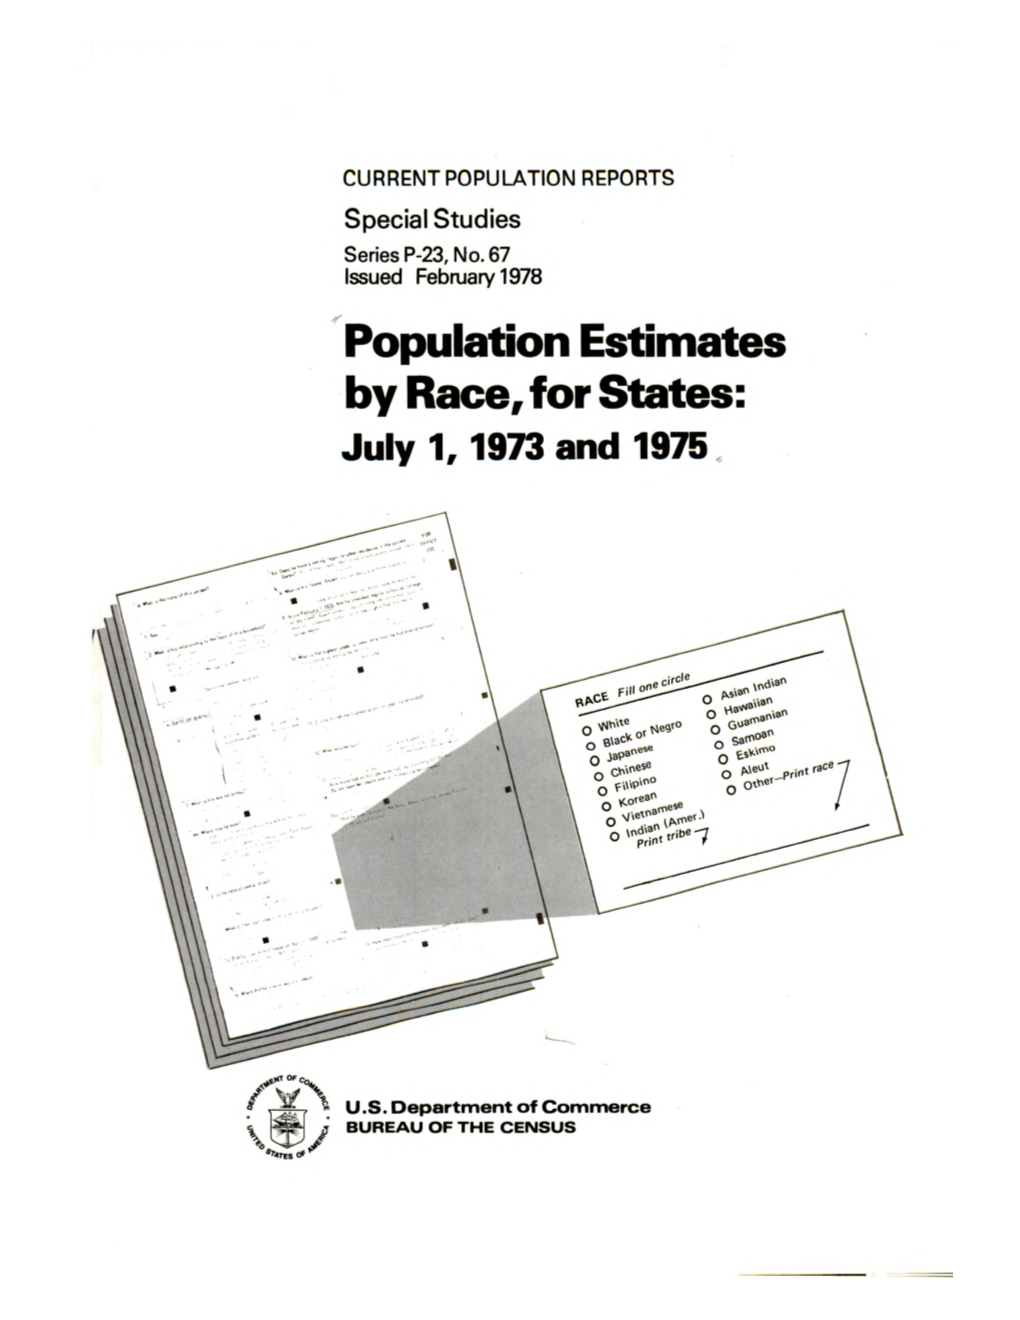 Download Population Estimates by Race, for States: July 1, 1973 And